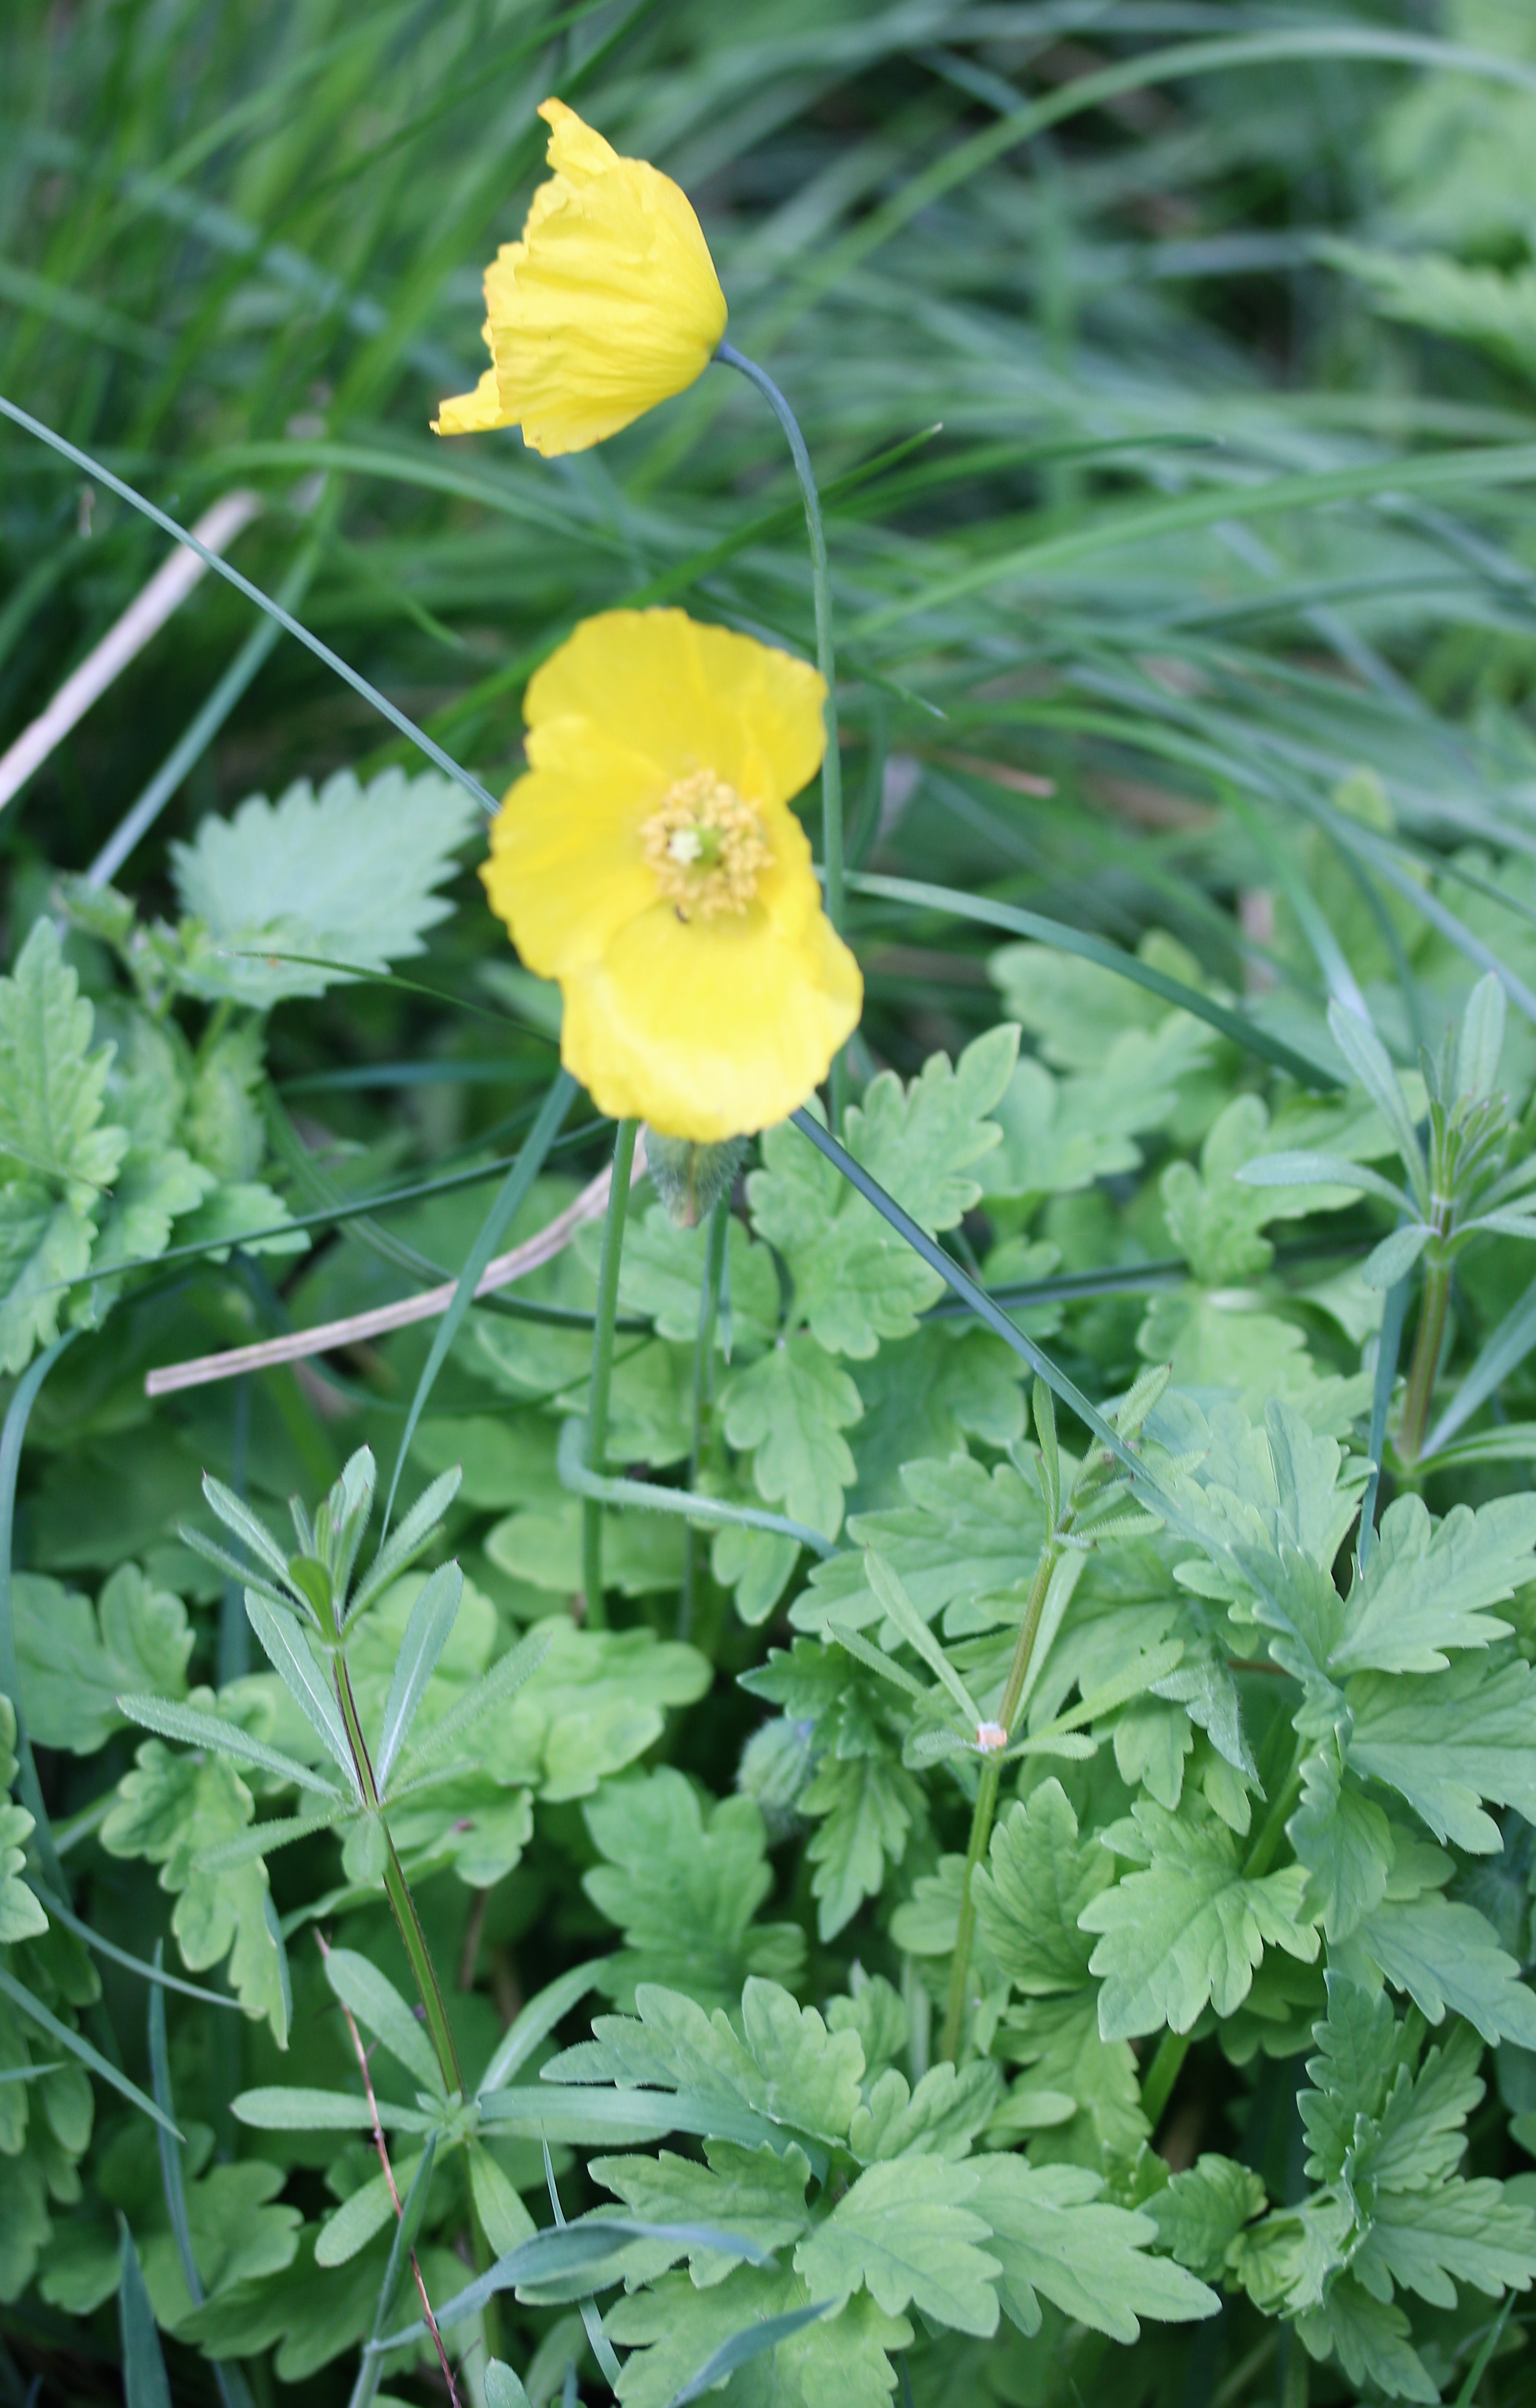 Meconopsis cambrica. Welsh Poppy.